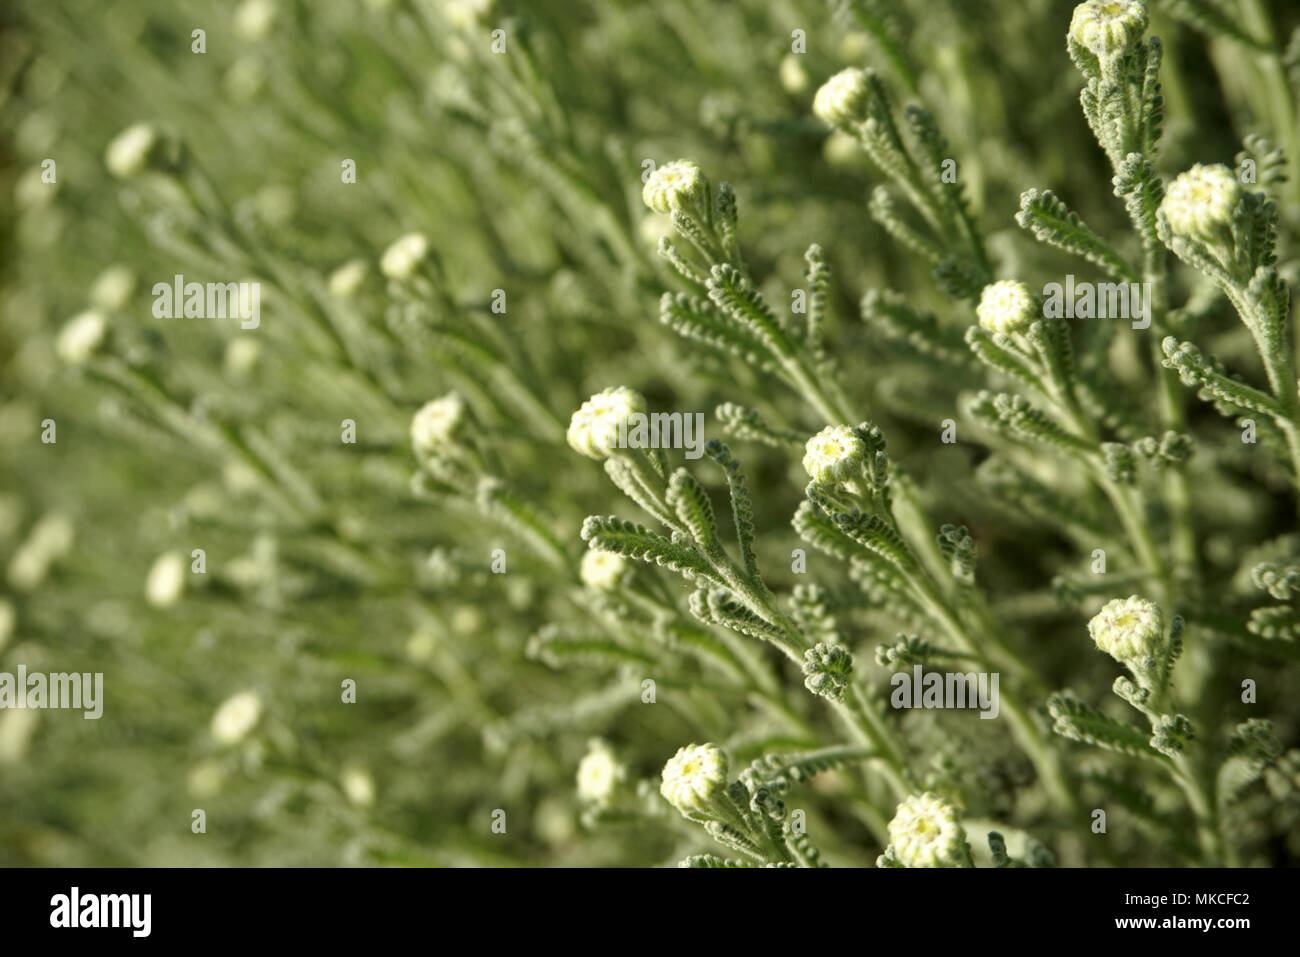 Close up and selective focus green buds of Astolina chamaecyparissus, Mediterranean bush, selective focus on nature detail Stock Photo